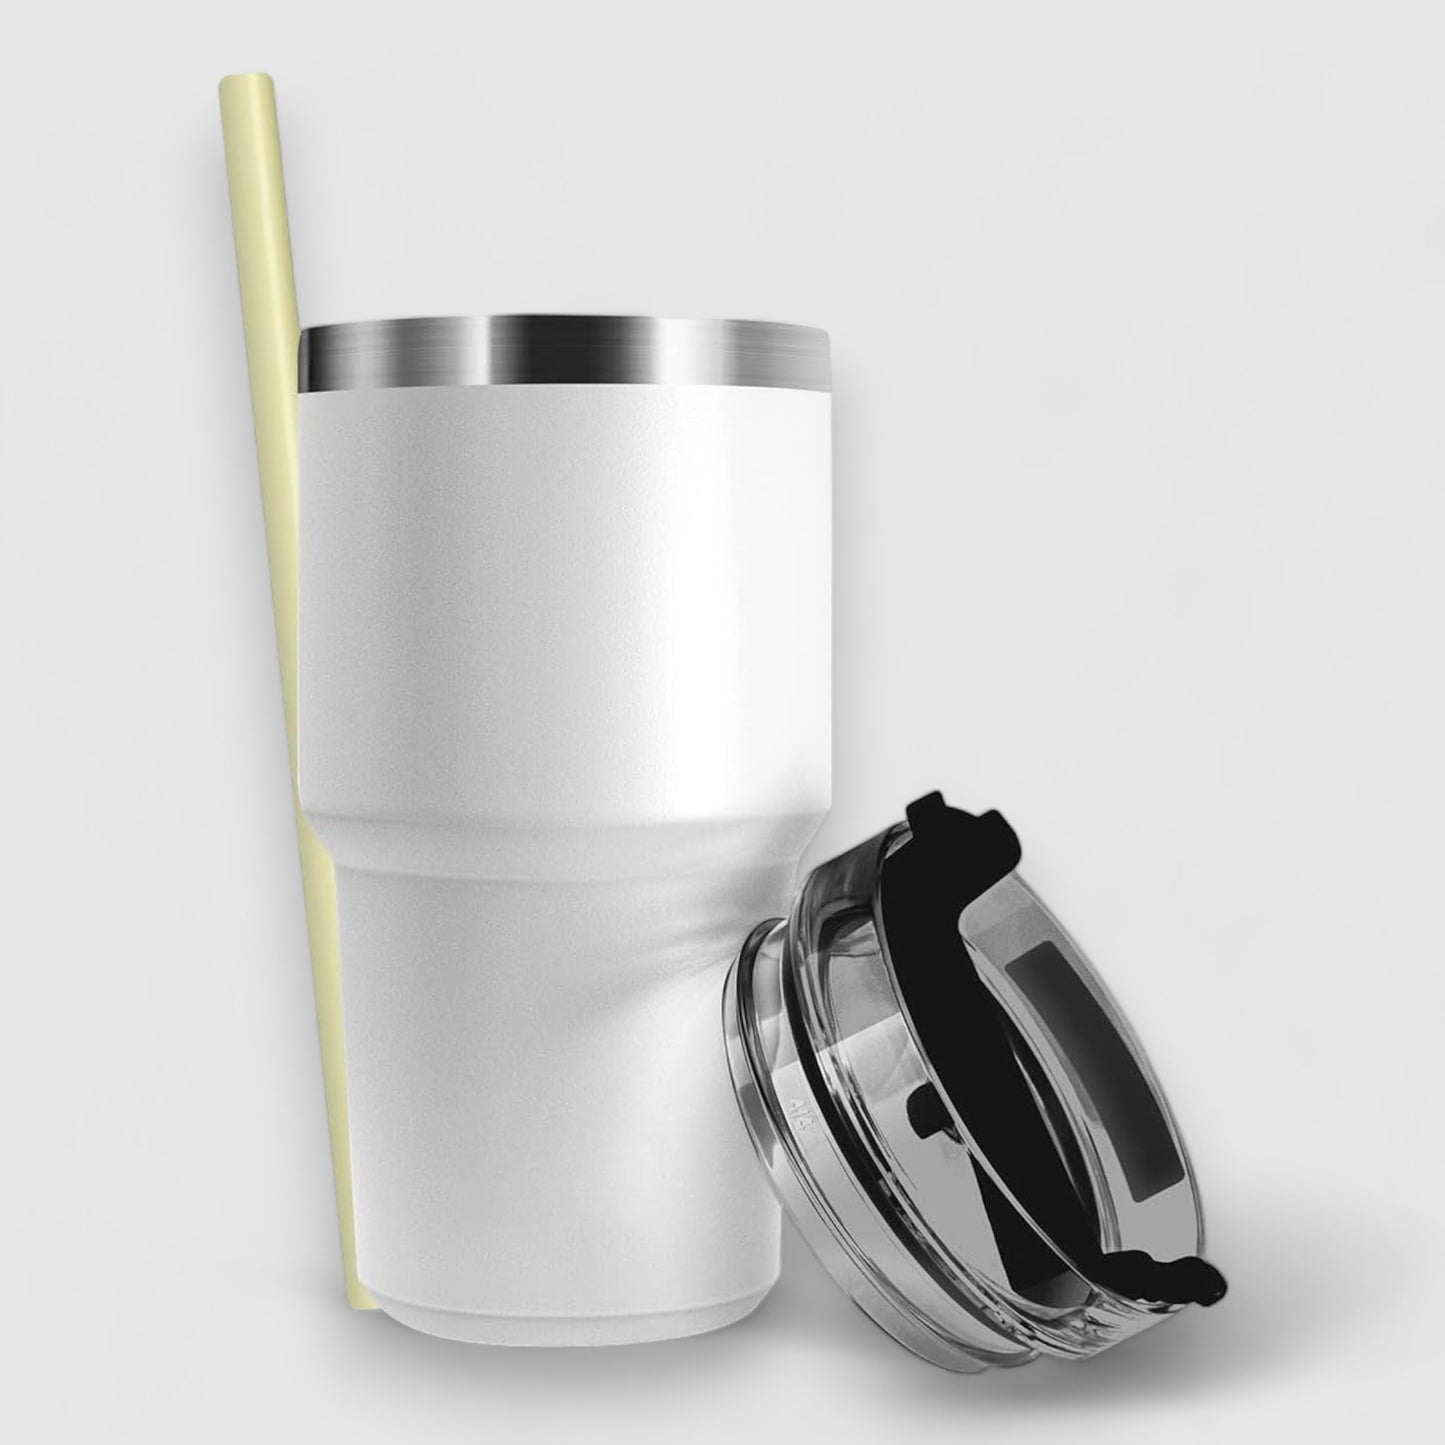 Verve — 600ml Handy Tumbler With Lid and Straws, Suitable For Travel